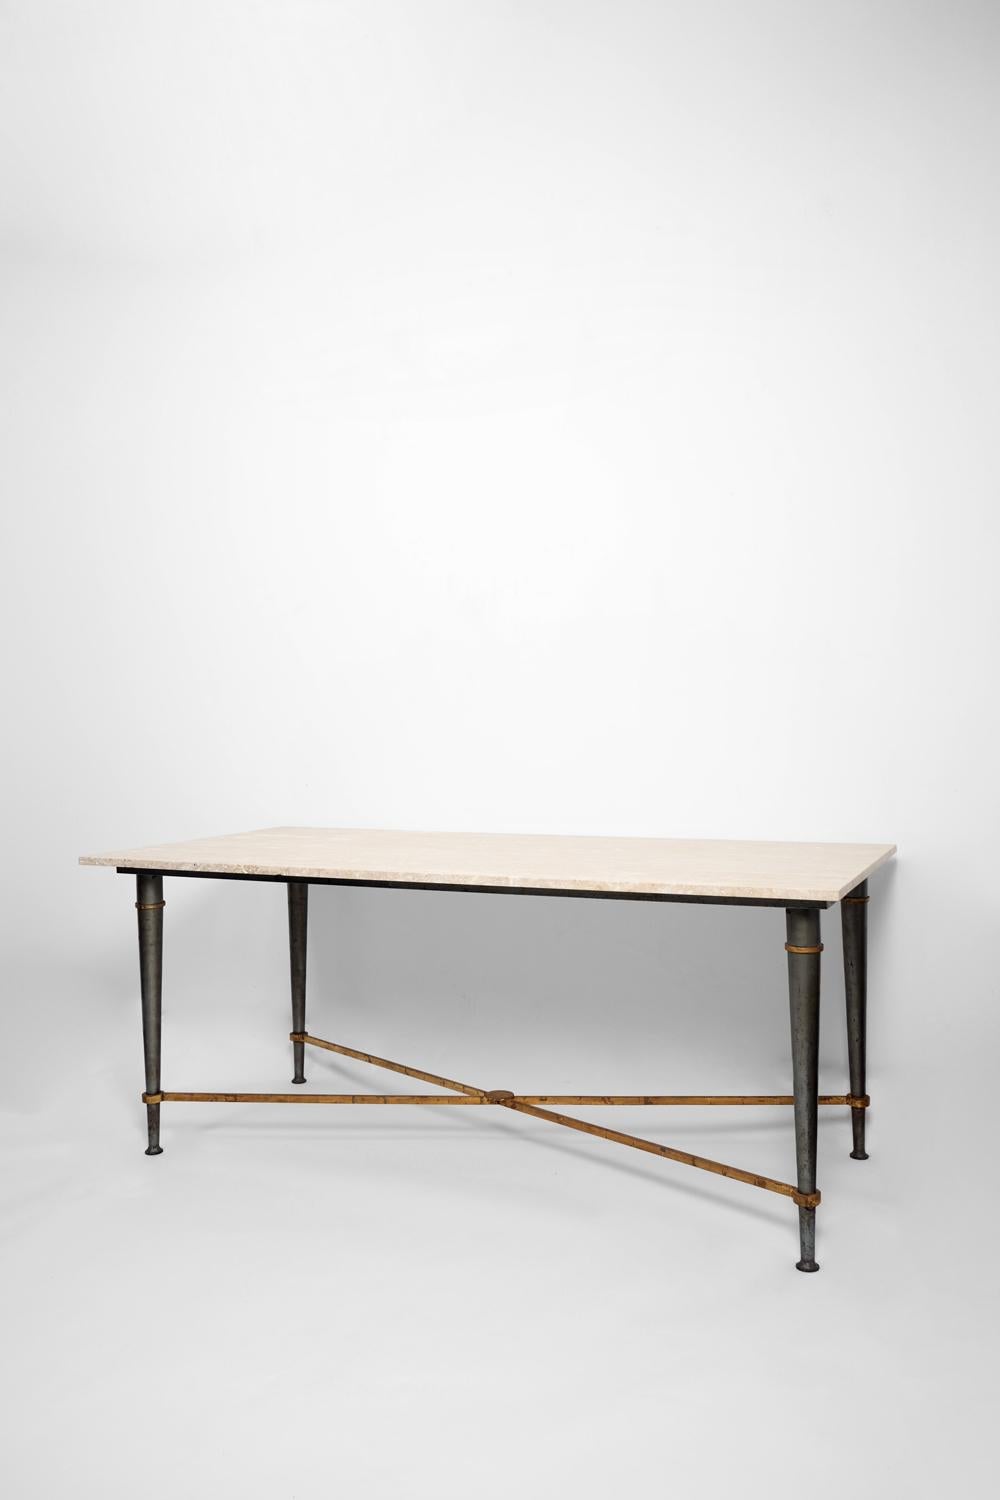 Dining table, console, in steel with gunmetal and gilded patinas, with conical ringed legs connected by an X-shaped spacer supporting a beige travertine stone top, by Jacques de Rumigny. France, 1960s.